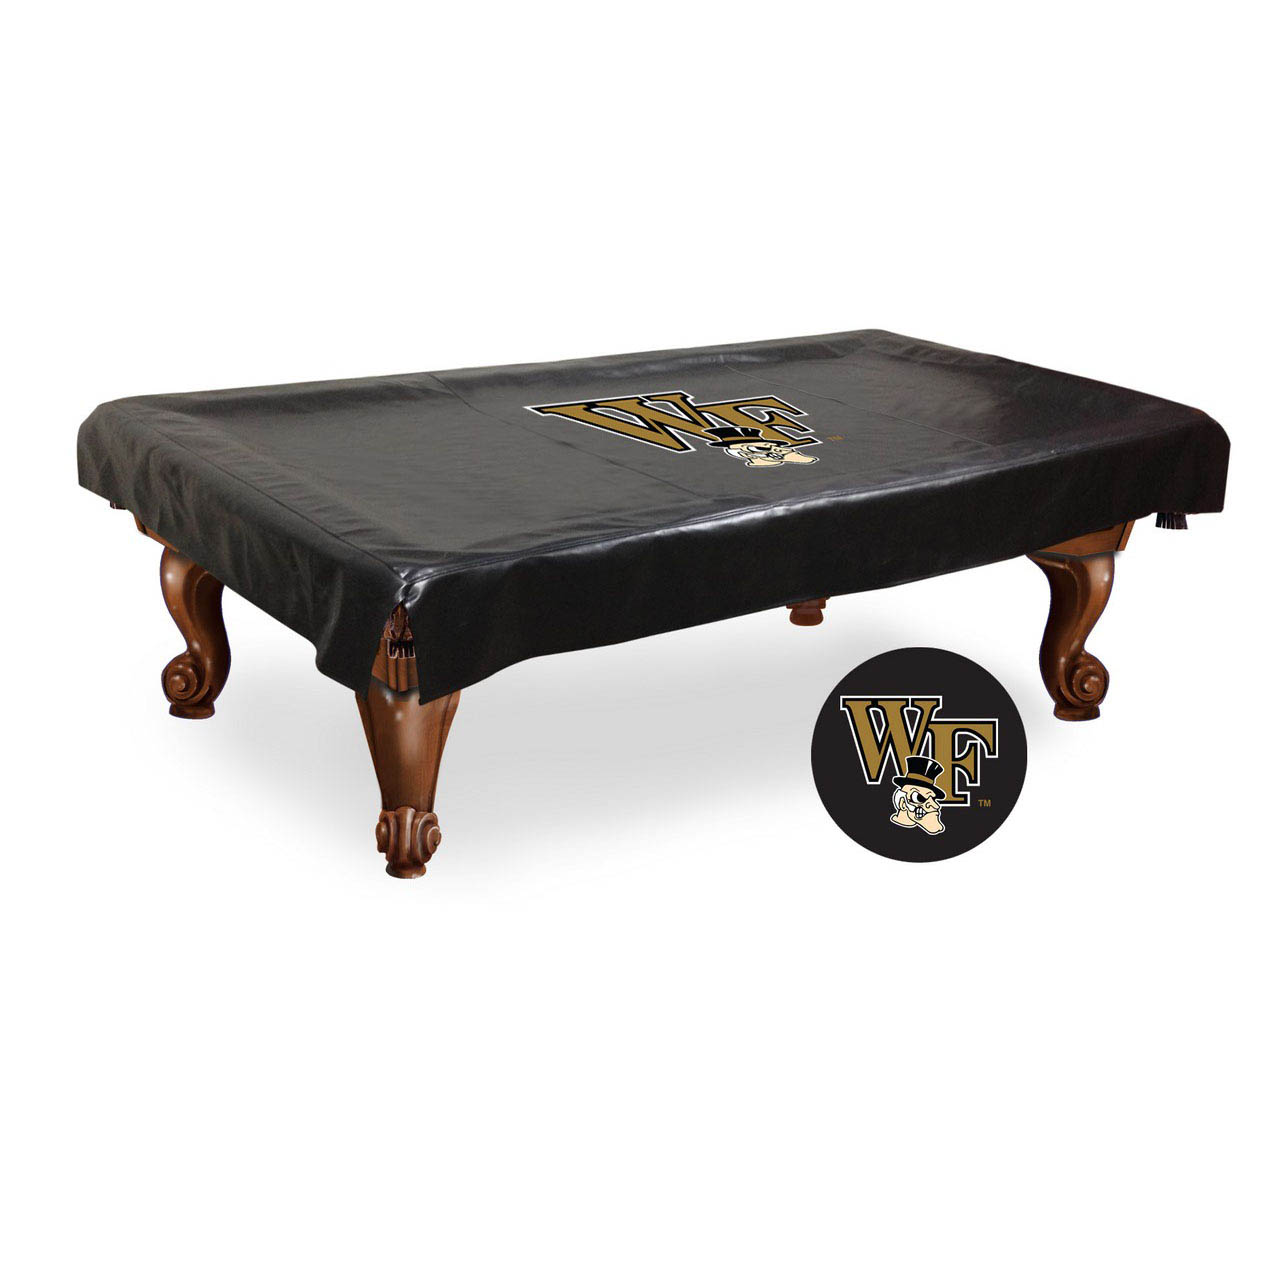 Wake Forest Billiard Table Cover